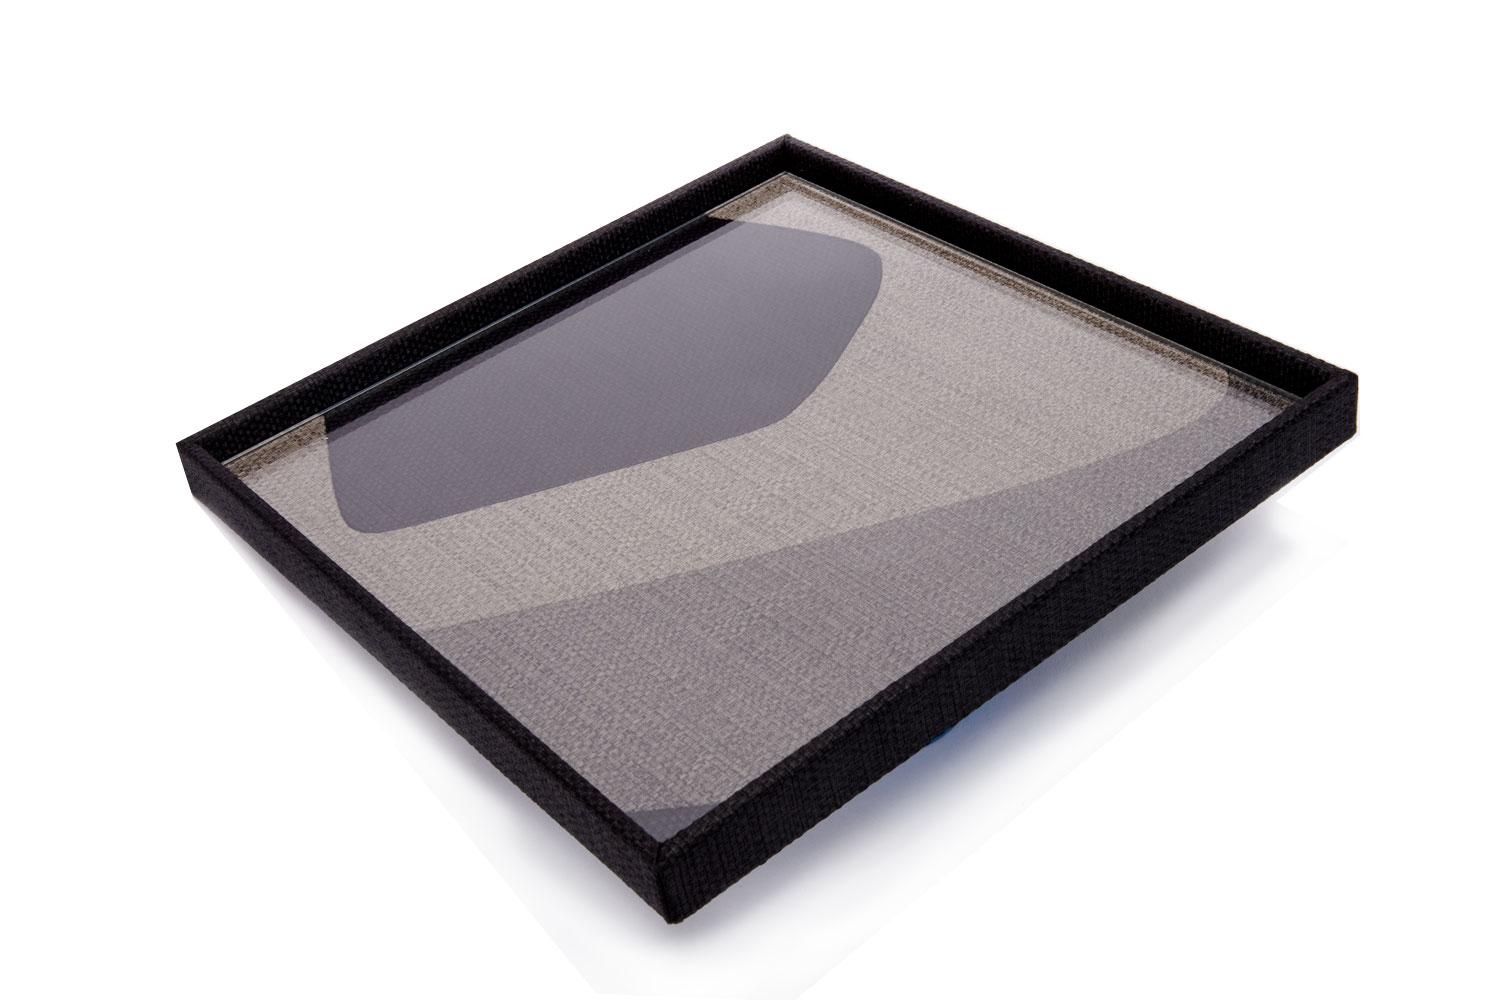 13” square geometric patch tray with glass top by Gilles Caffier

Tray patched of geometric pattern is made from cotton, polyester and has removable glass.

Renowned for his unique & limited edition pieces, Gilles Caffier creates topical